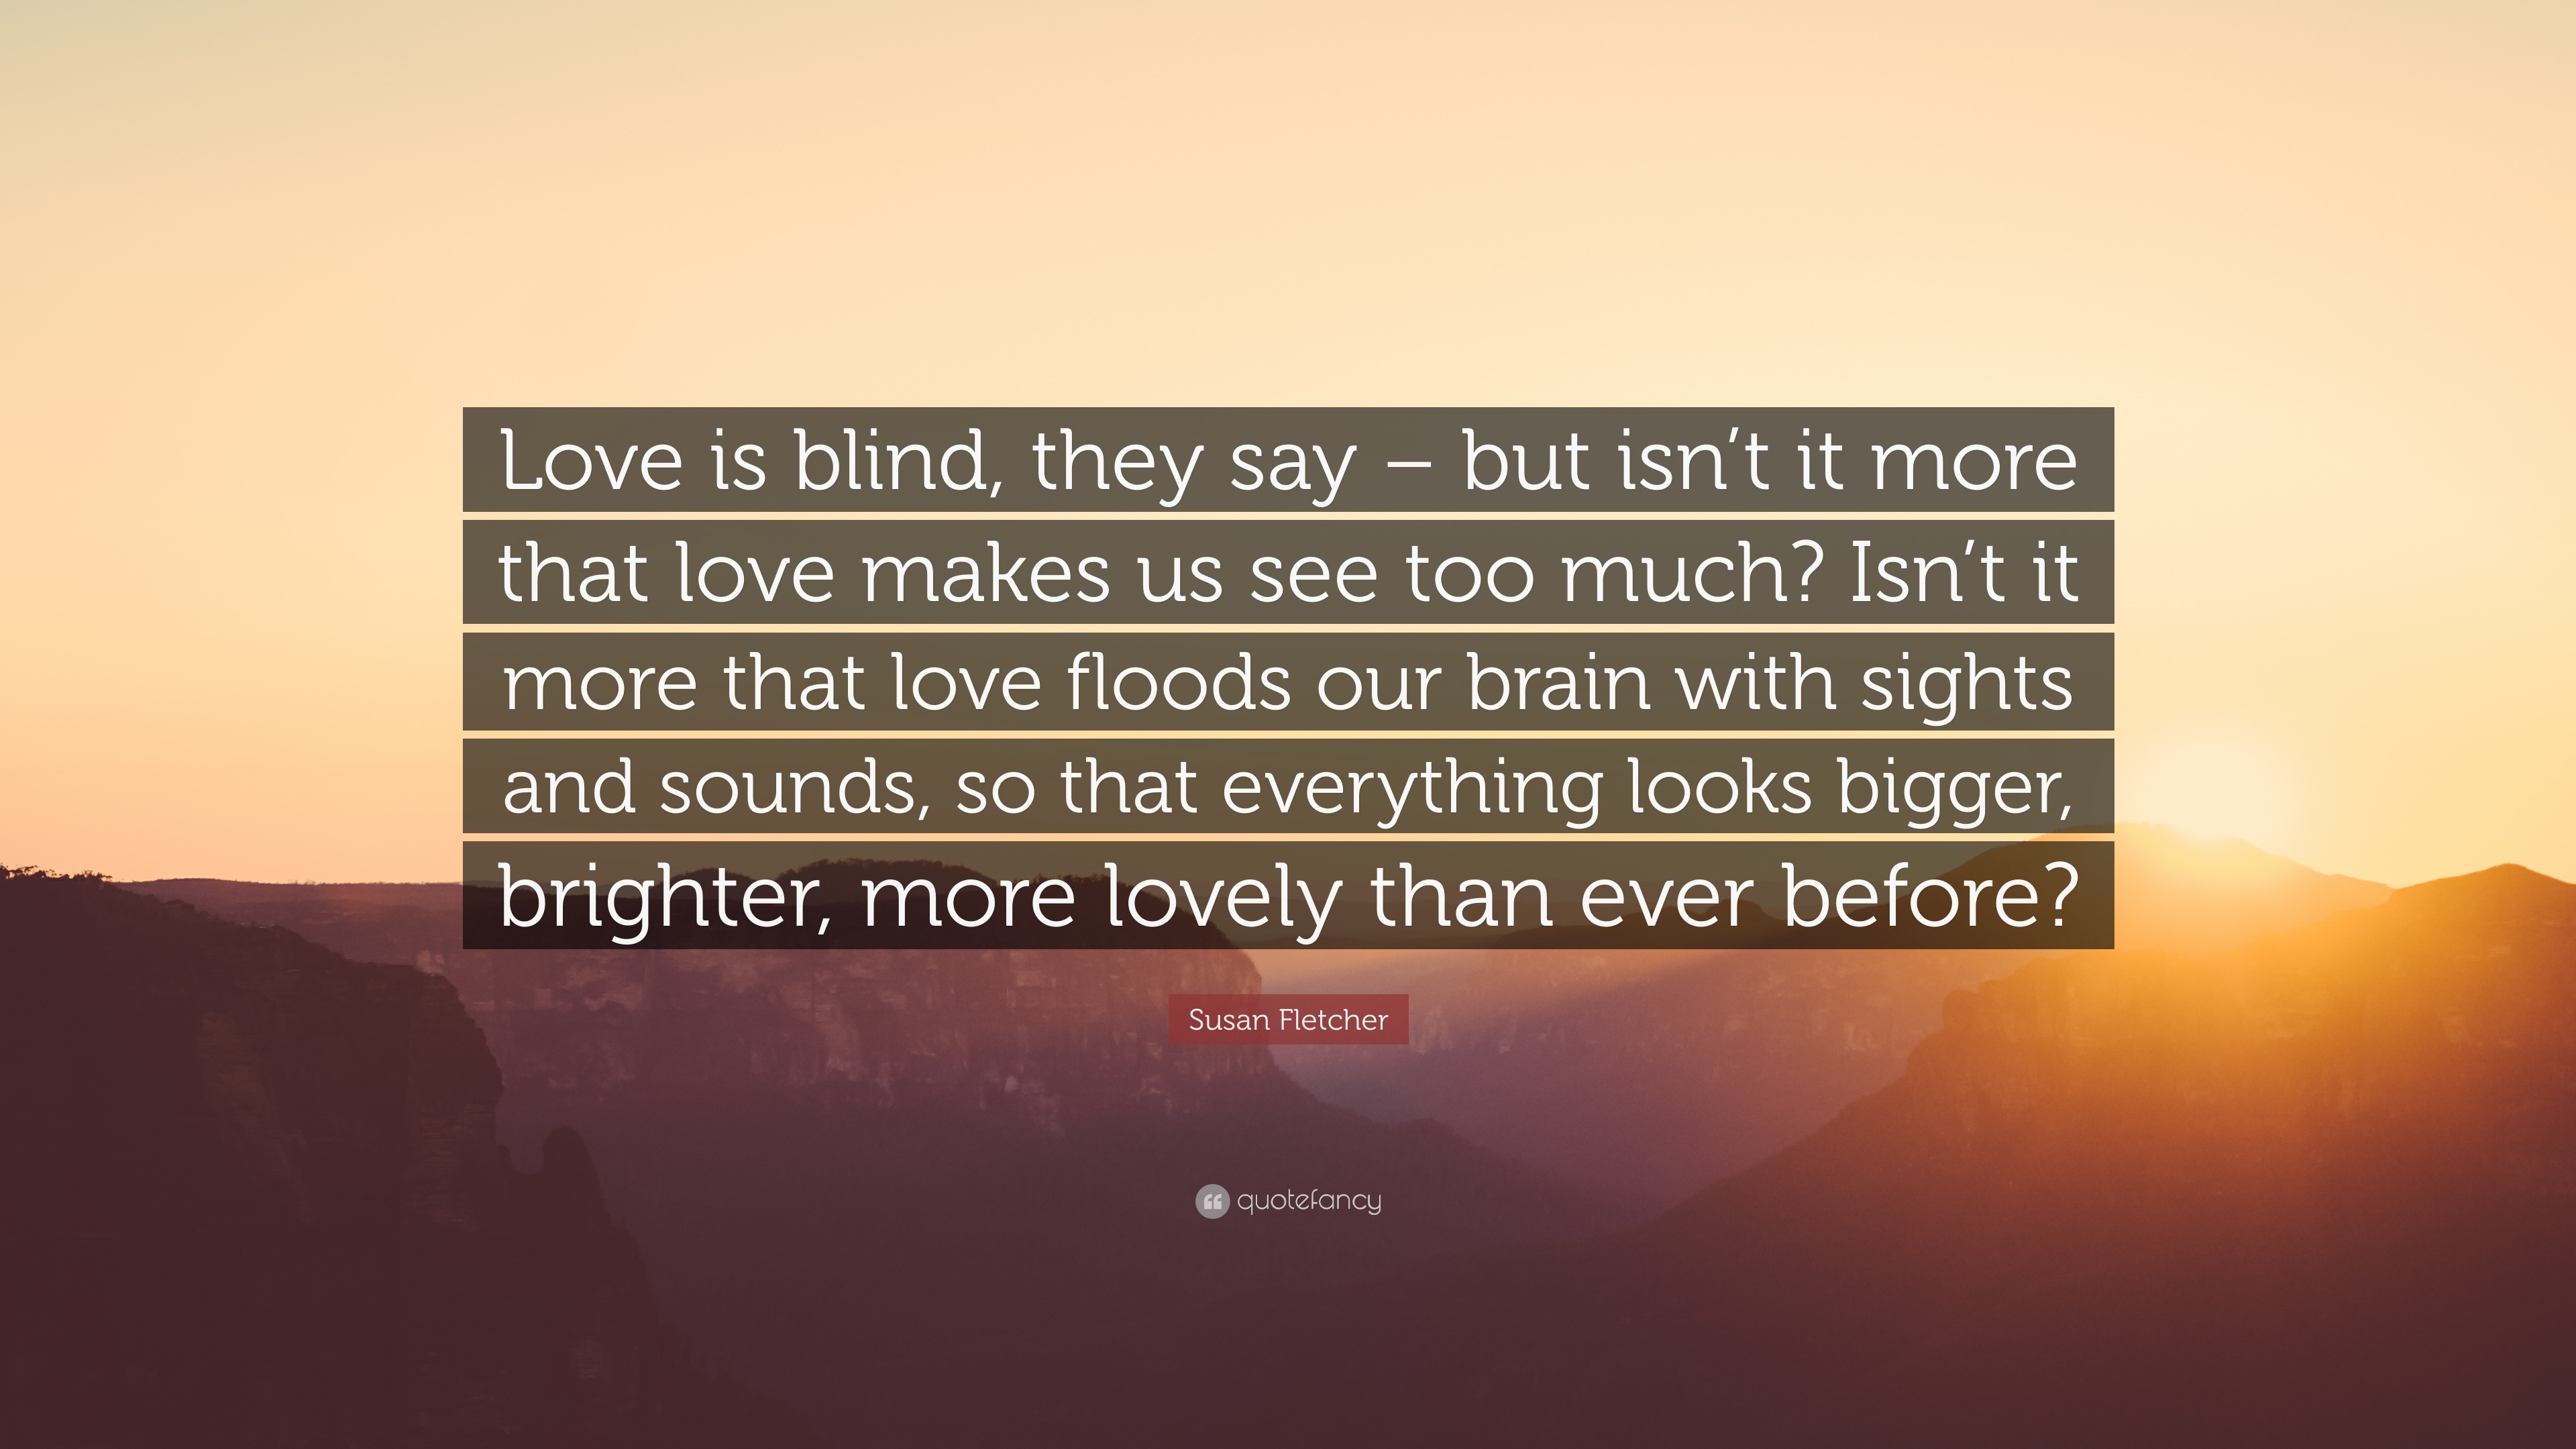 Susan Fletcher Quote “Love is blind they say – but isn t